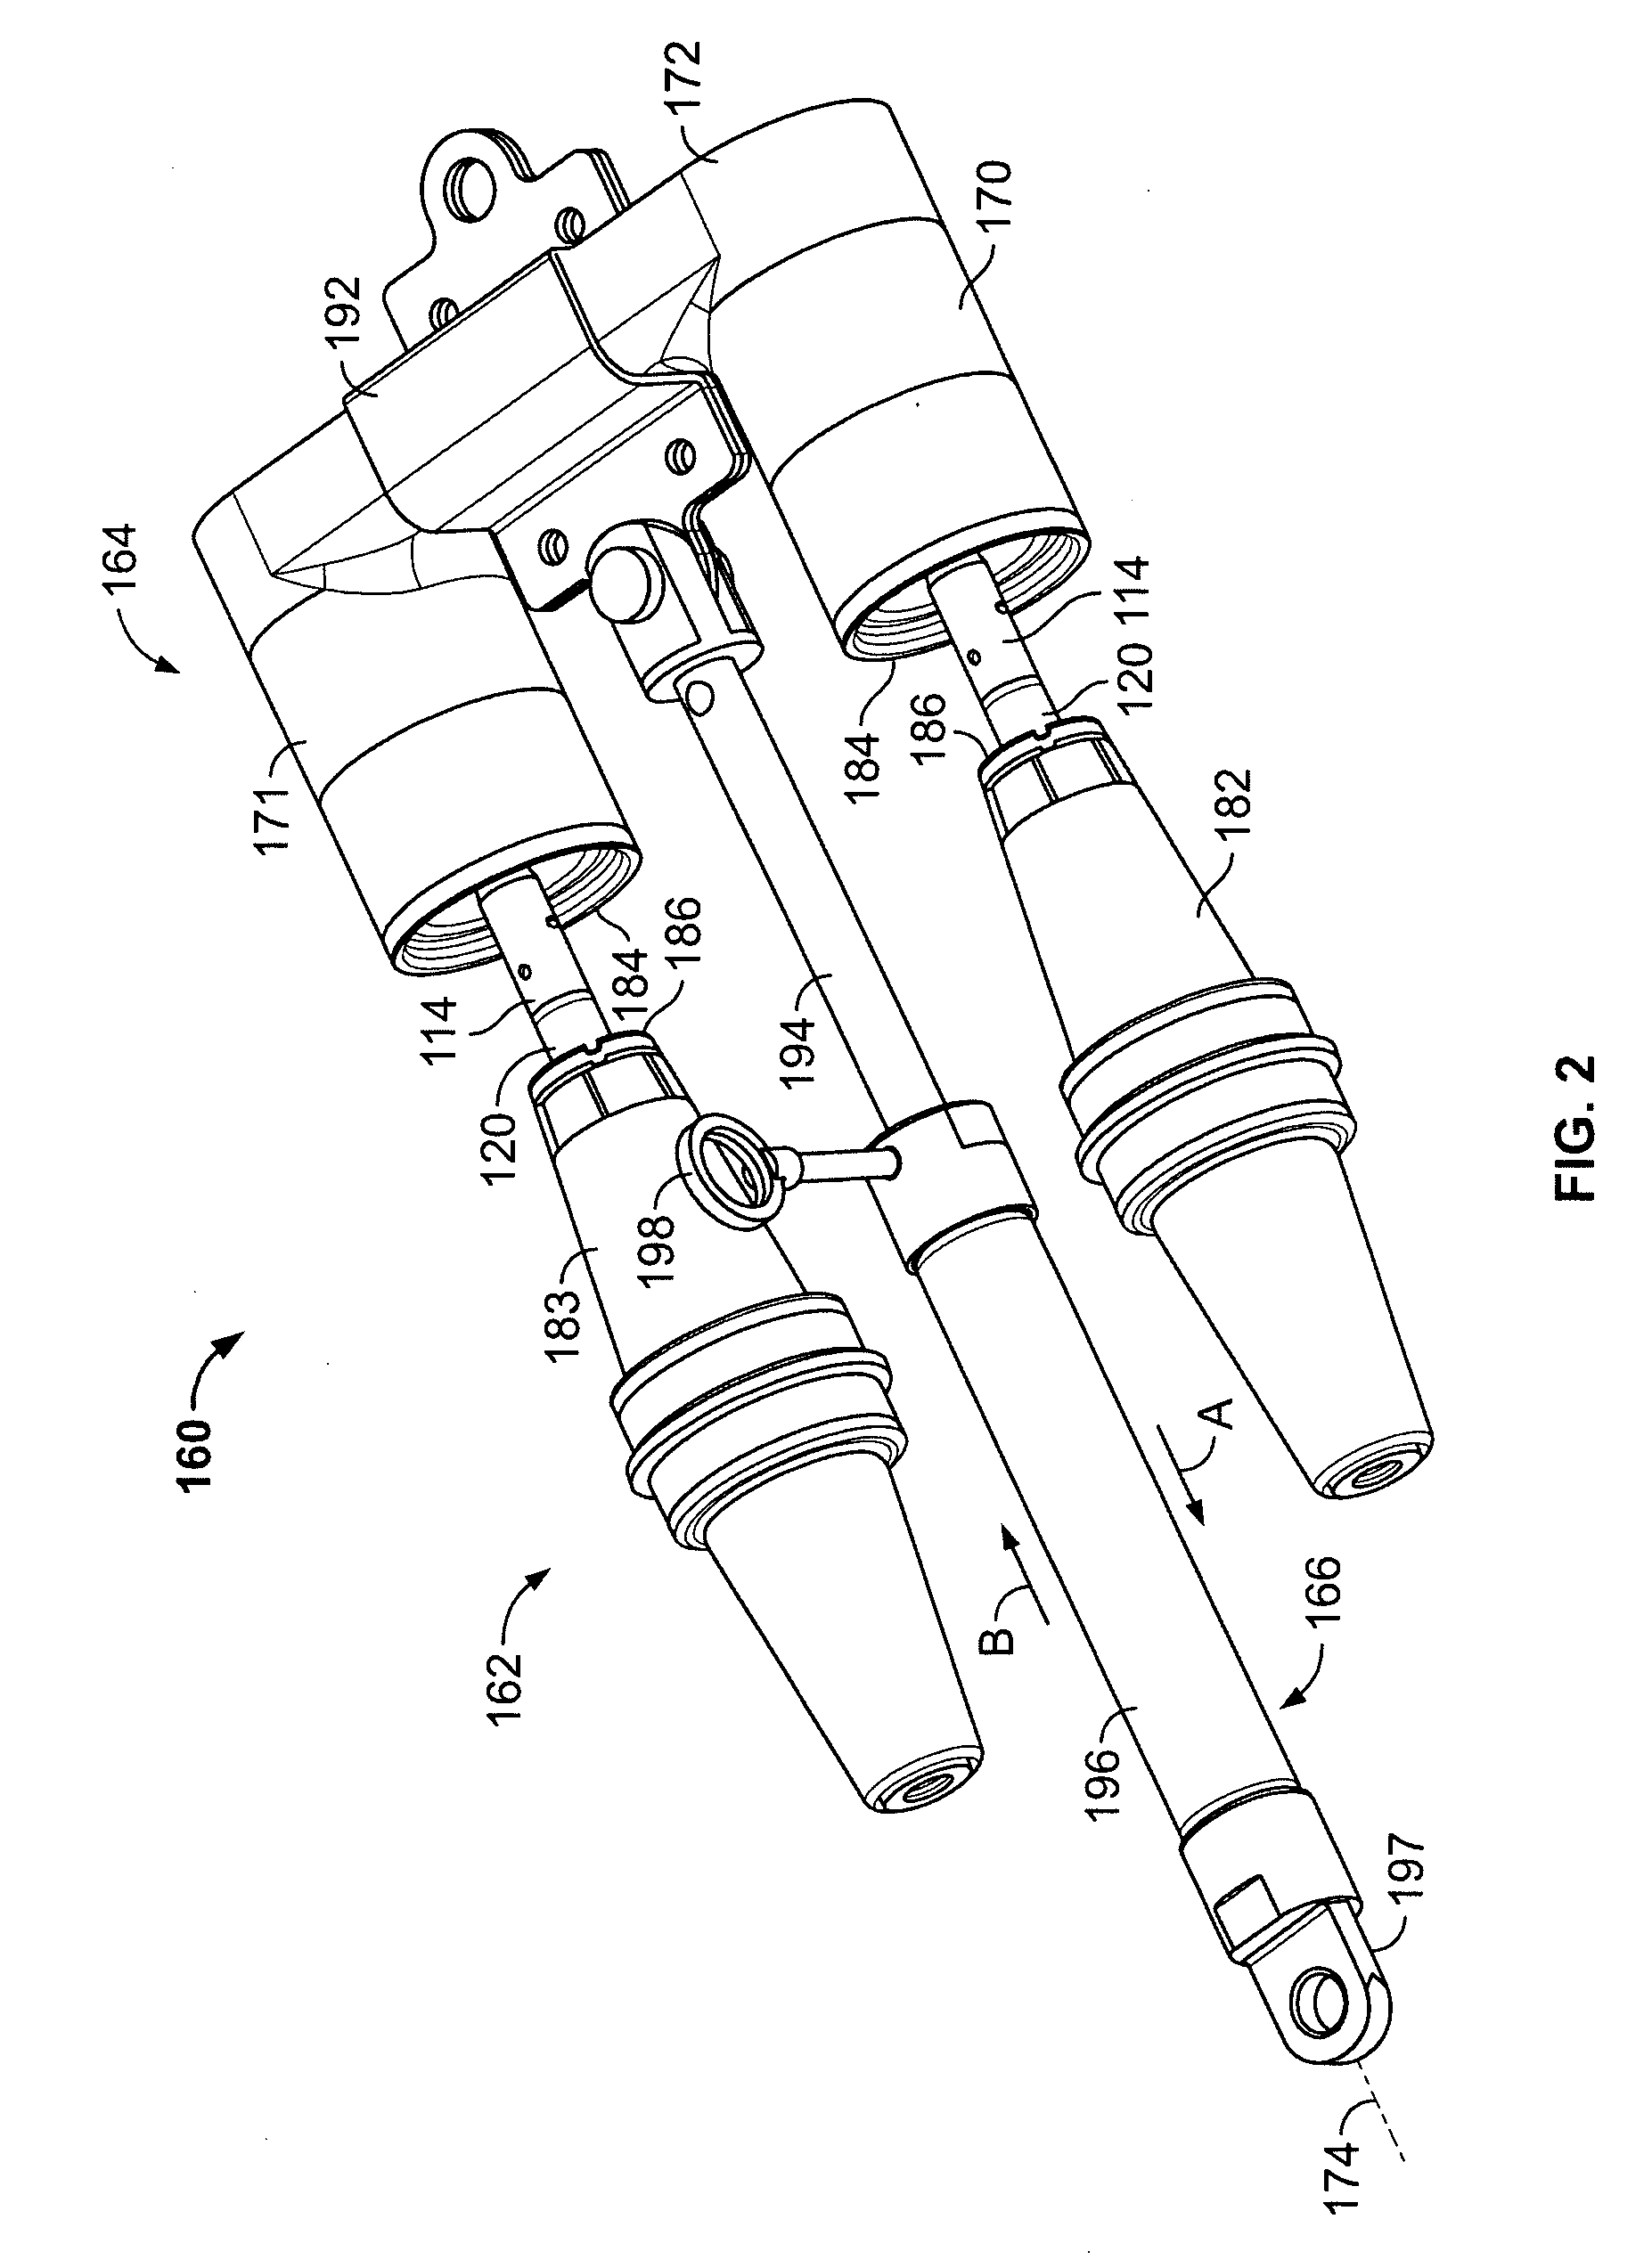 Apparatus, system and methods for deadfront visible loadbreak